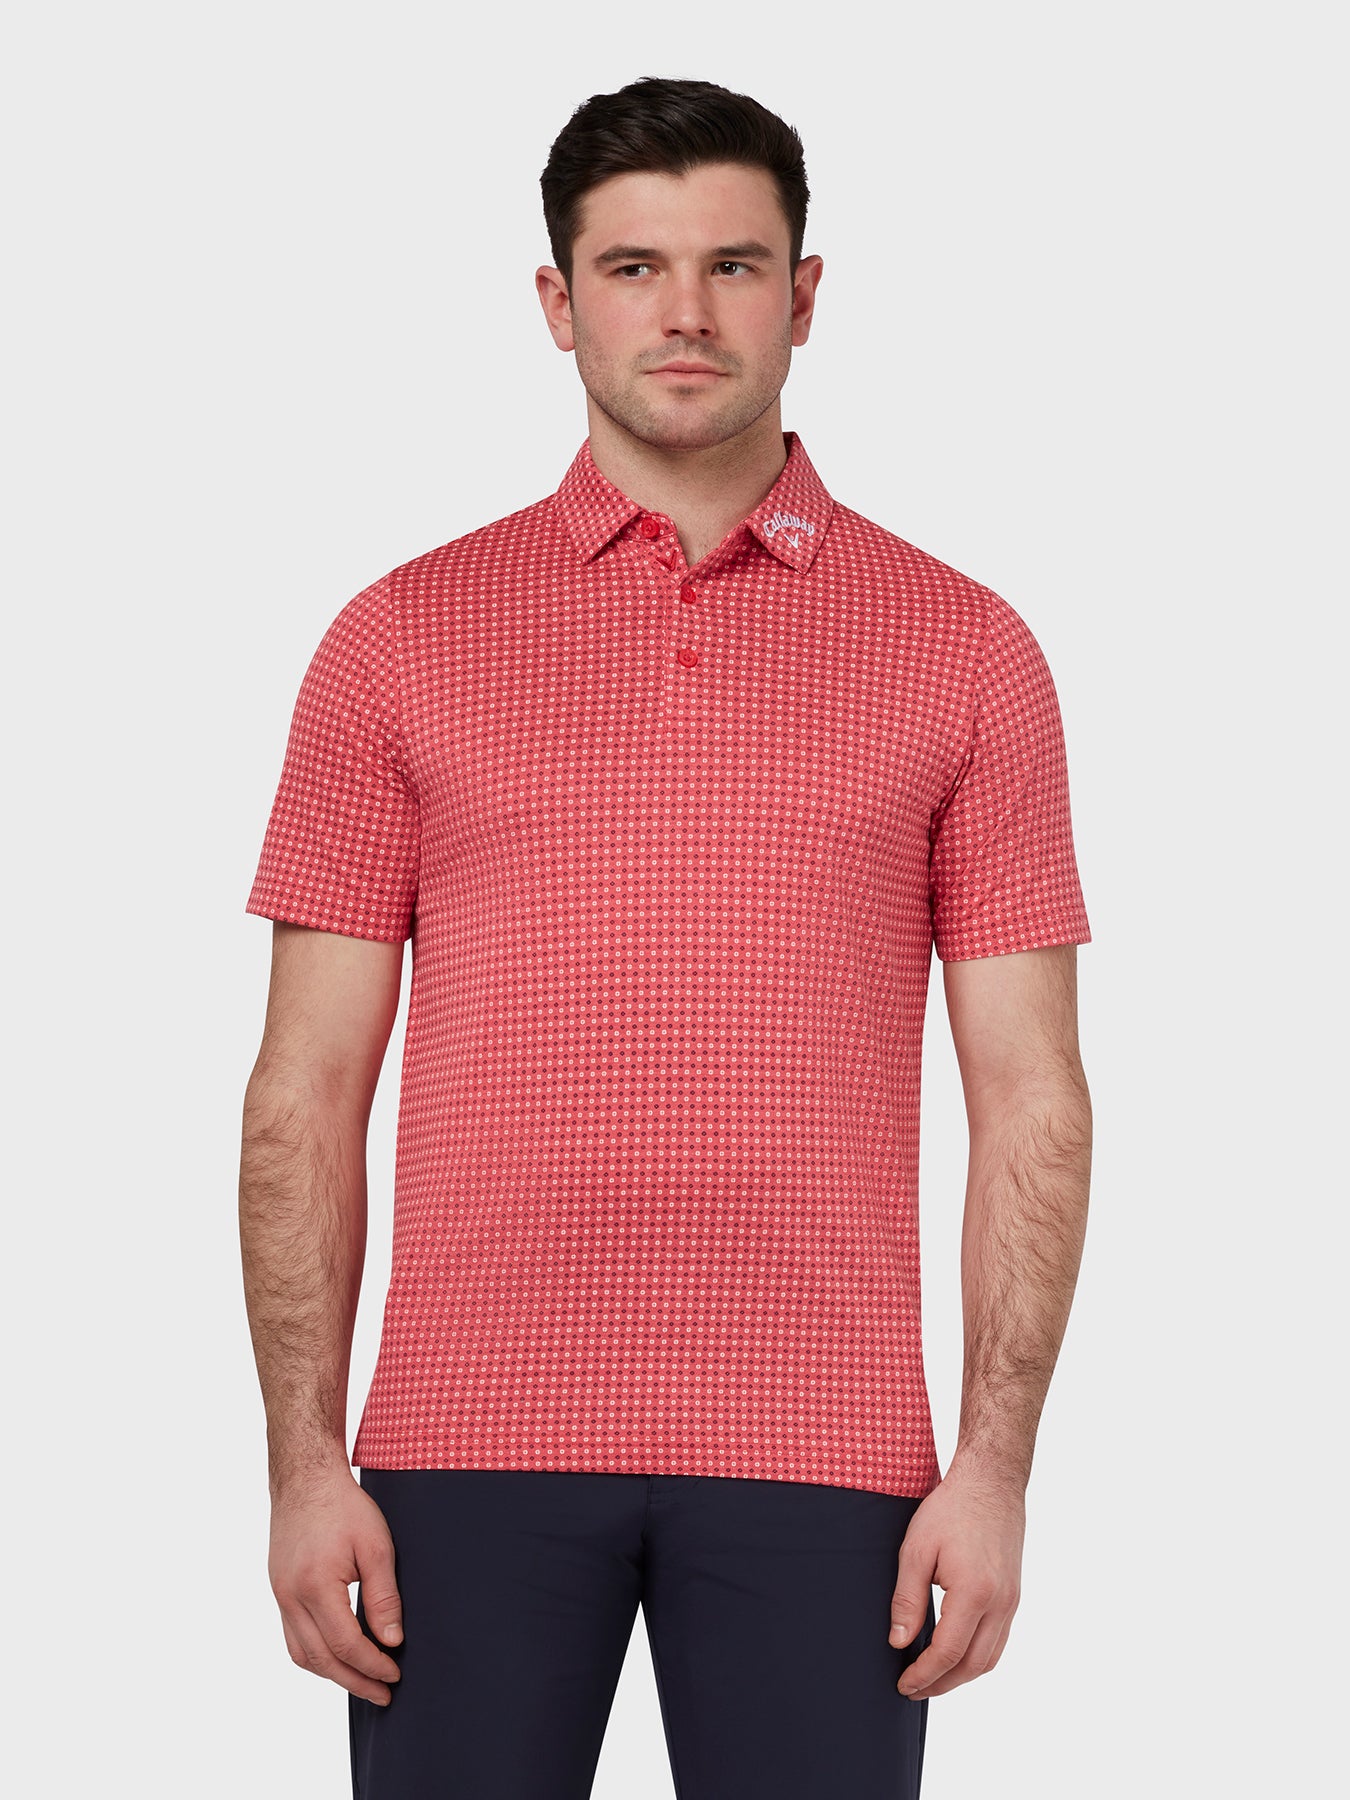 View Soft Touch Micro Print Polo In Teaberry Heather Teaberry Heather XXXL information